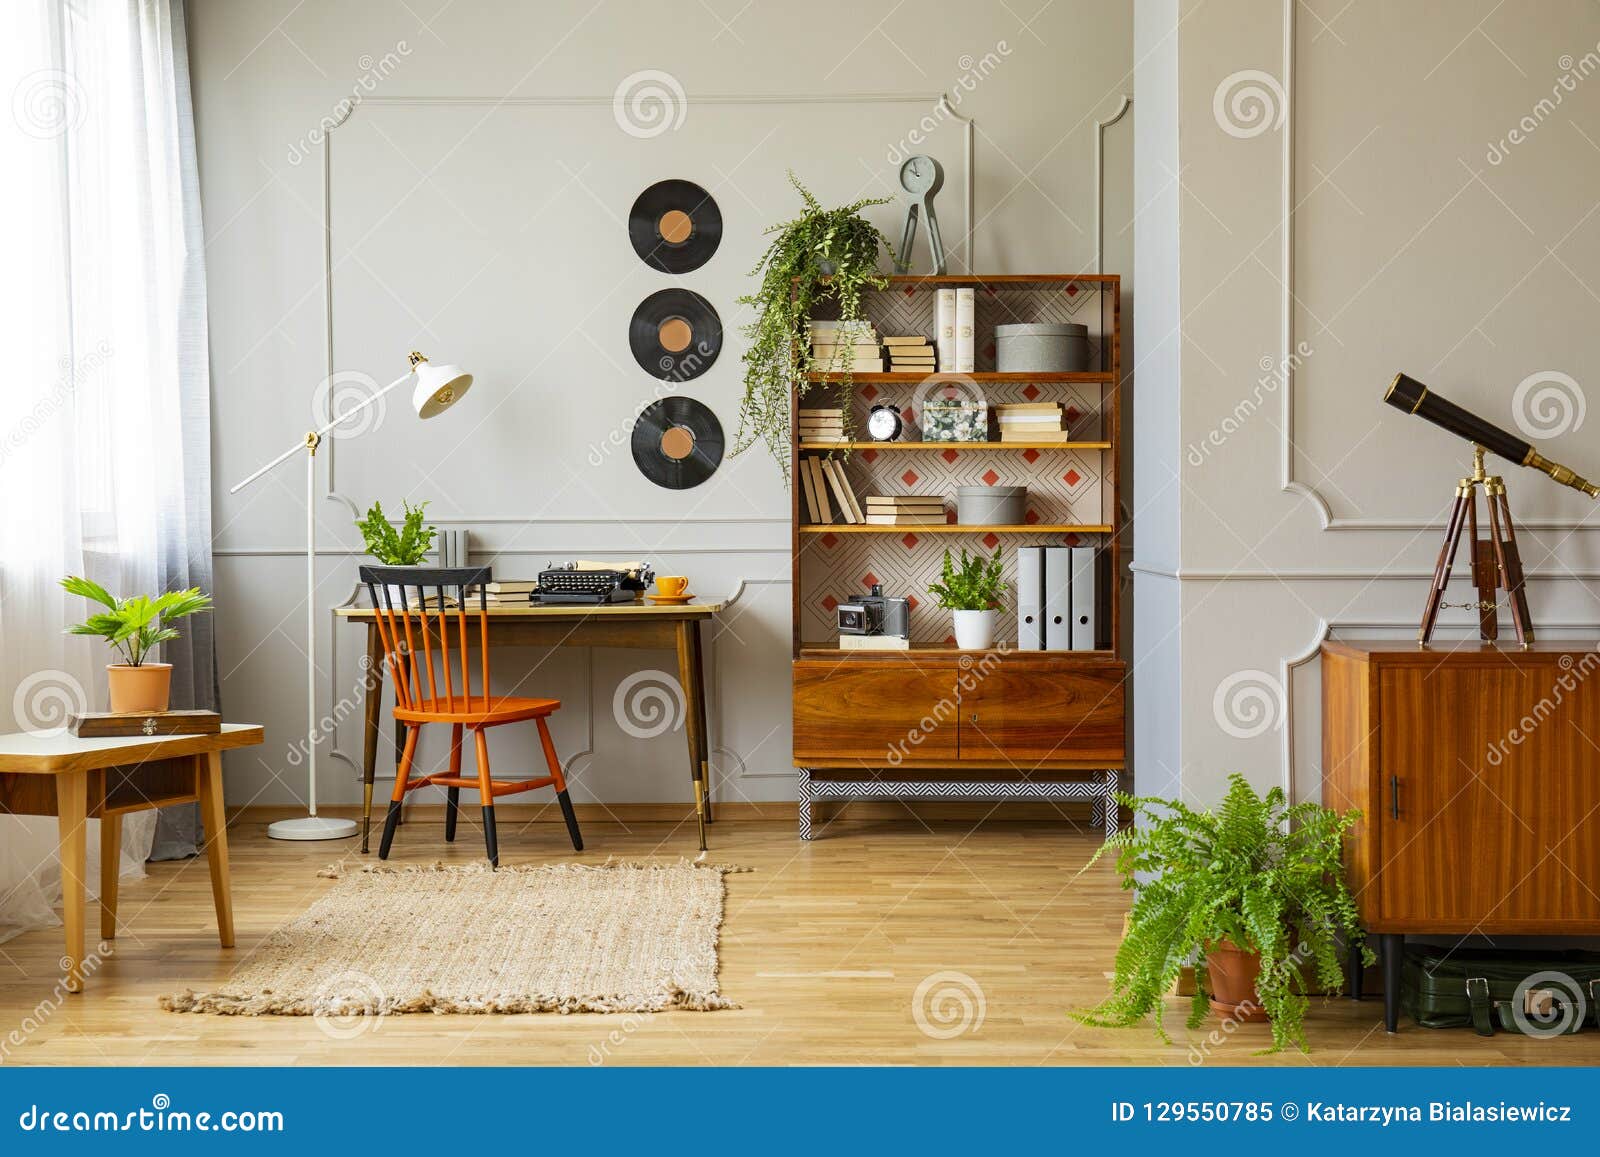 Vinyl Records Decorations On A Gray Wall With Molding And Wooden